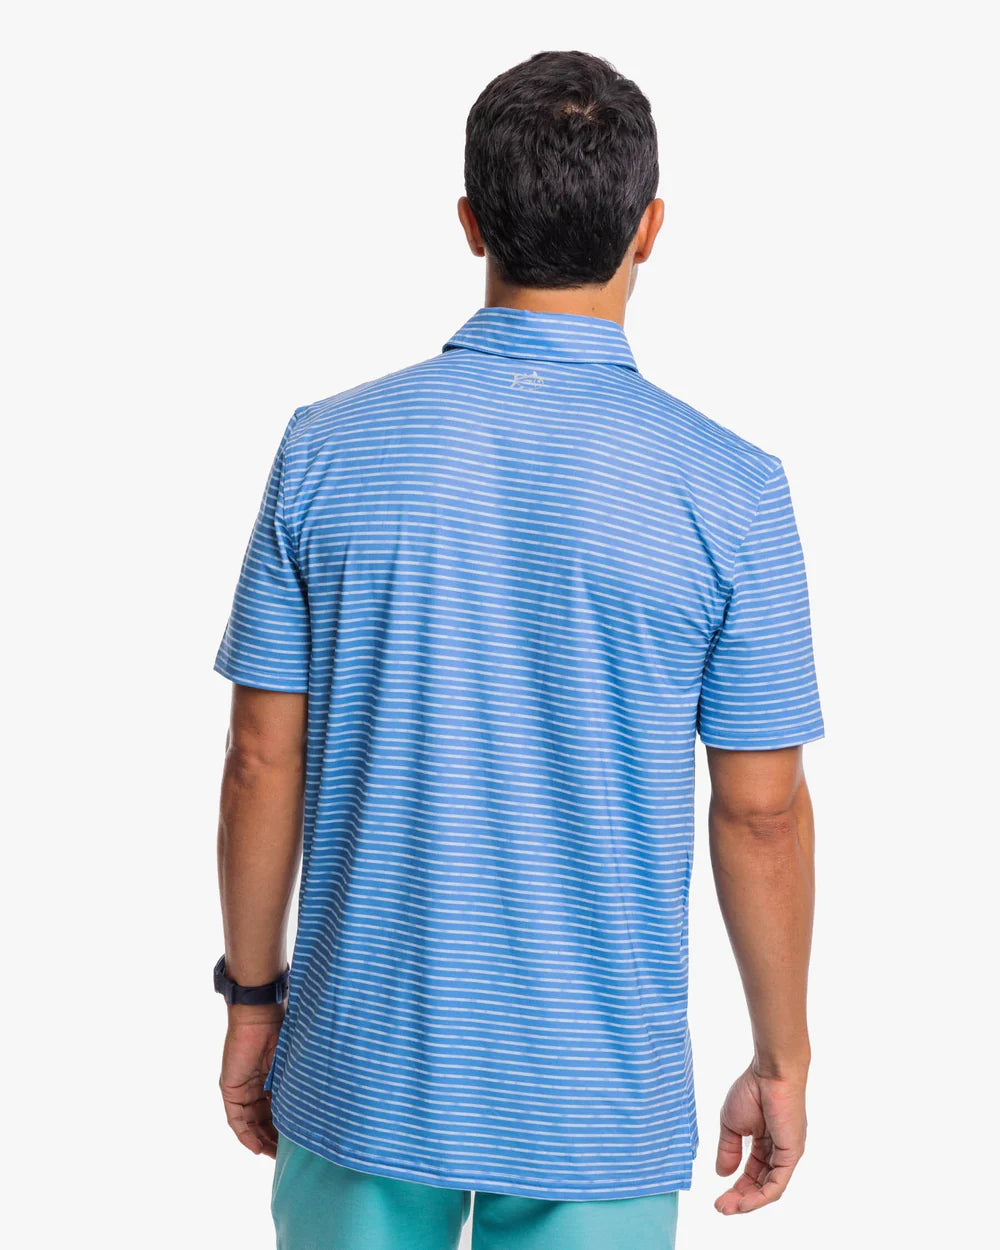 Southern Tide Driver Wymberly Stripe Performance Polo Shirt